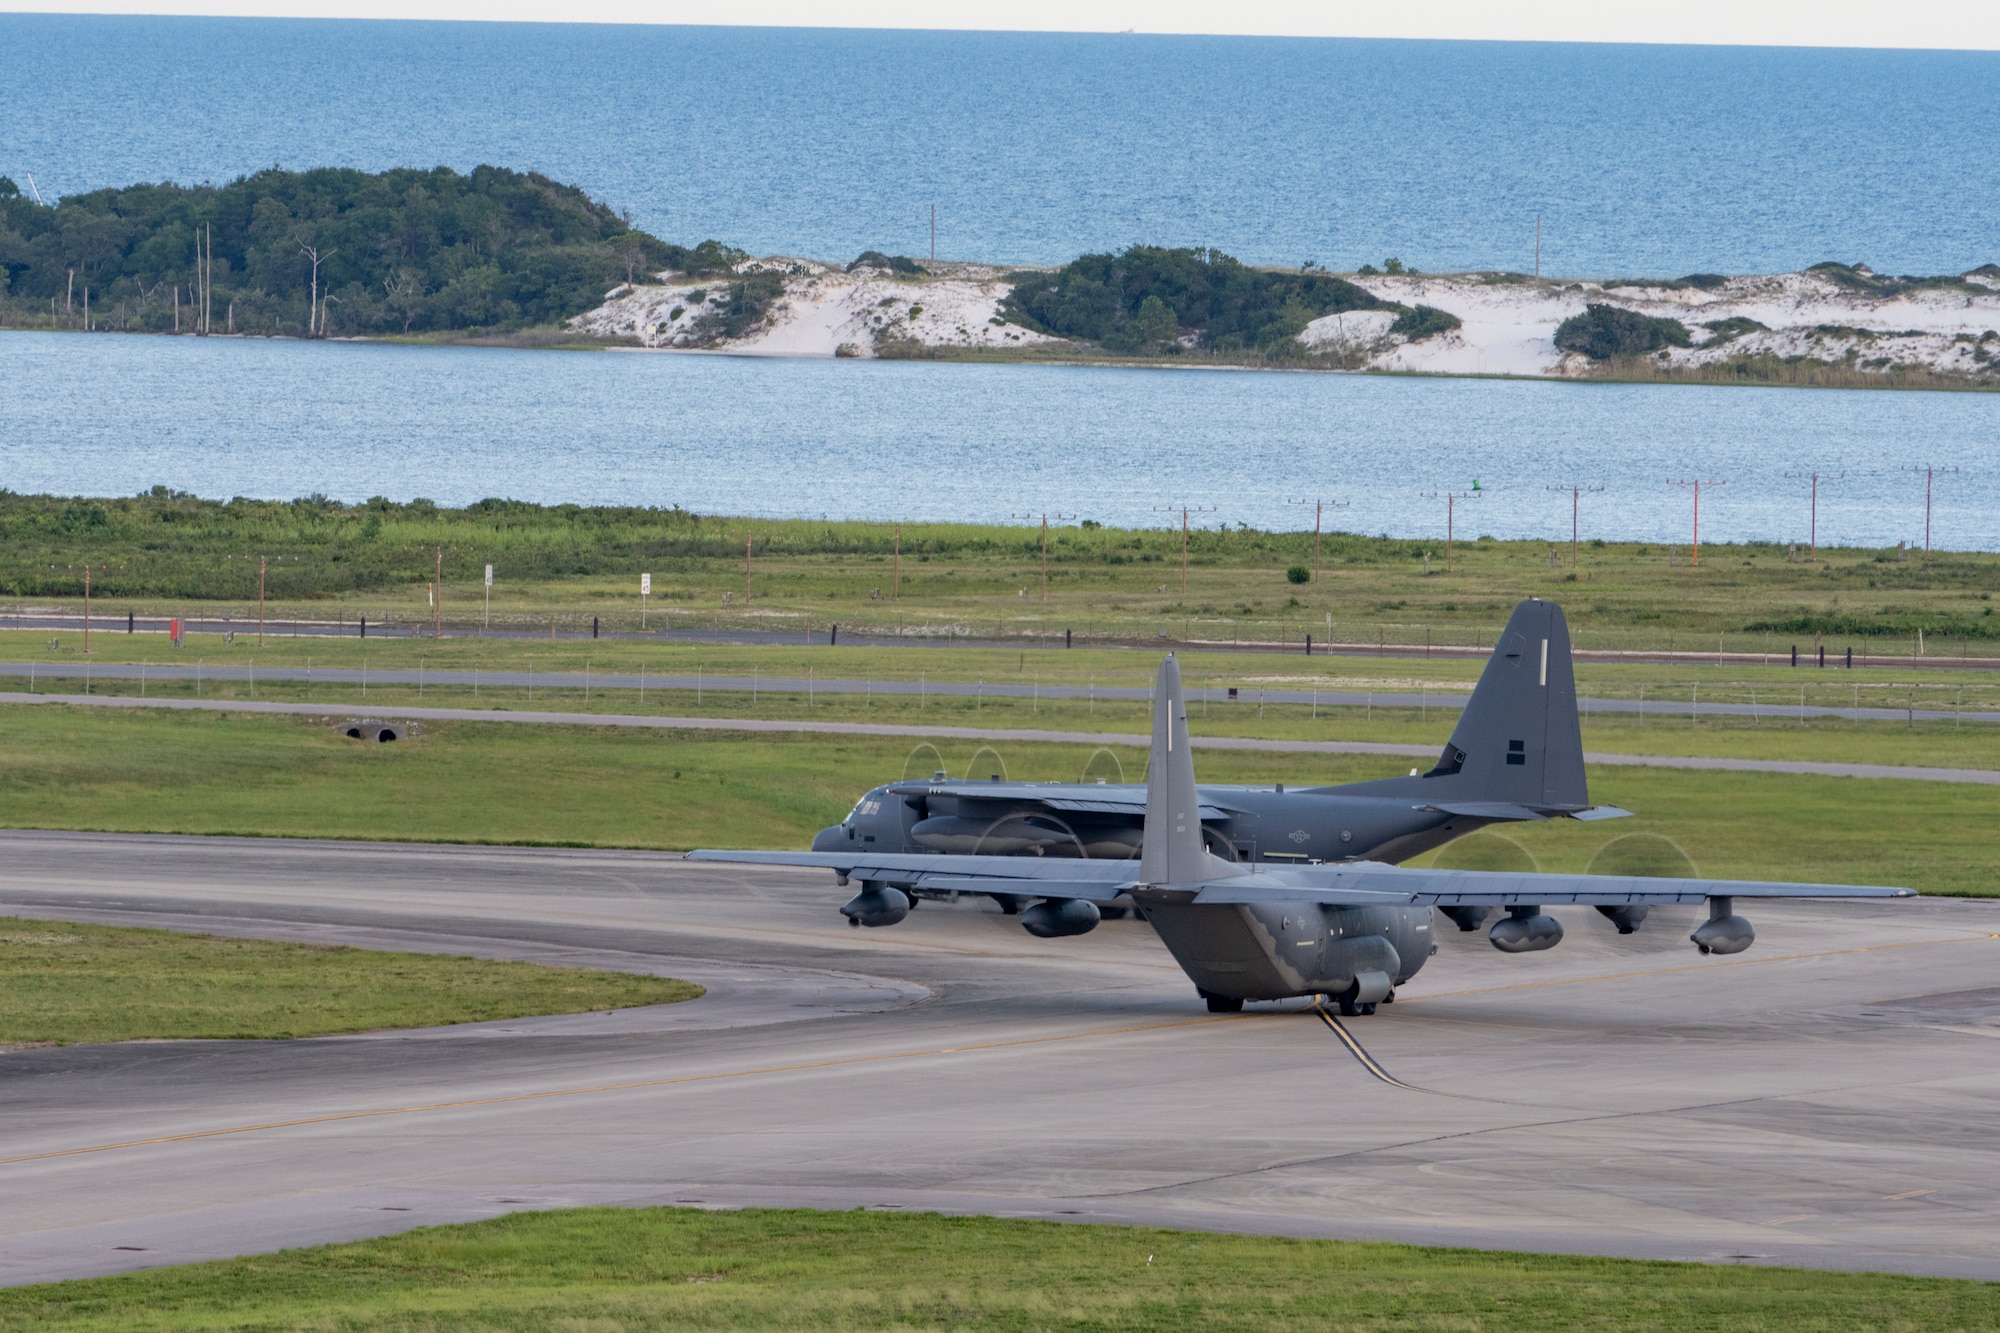 Two MC-130J Commando II aircraft from the 1st Special Operations Wing taxi from the parking ramp at Hurlburt Field, Florida, Jul. 6, 2023. The 1st Special Operation Wing, especially postured for rapid intervention in any crisis or conflict, launched two MC-130Js in support of U.S. Southern Command to enhance collective readiness, capability and contribute to regional security in the Western Hemisphere.